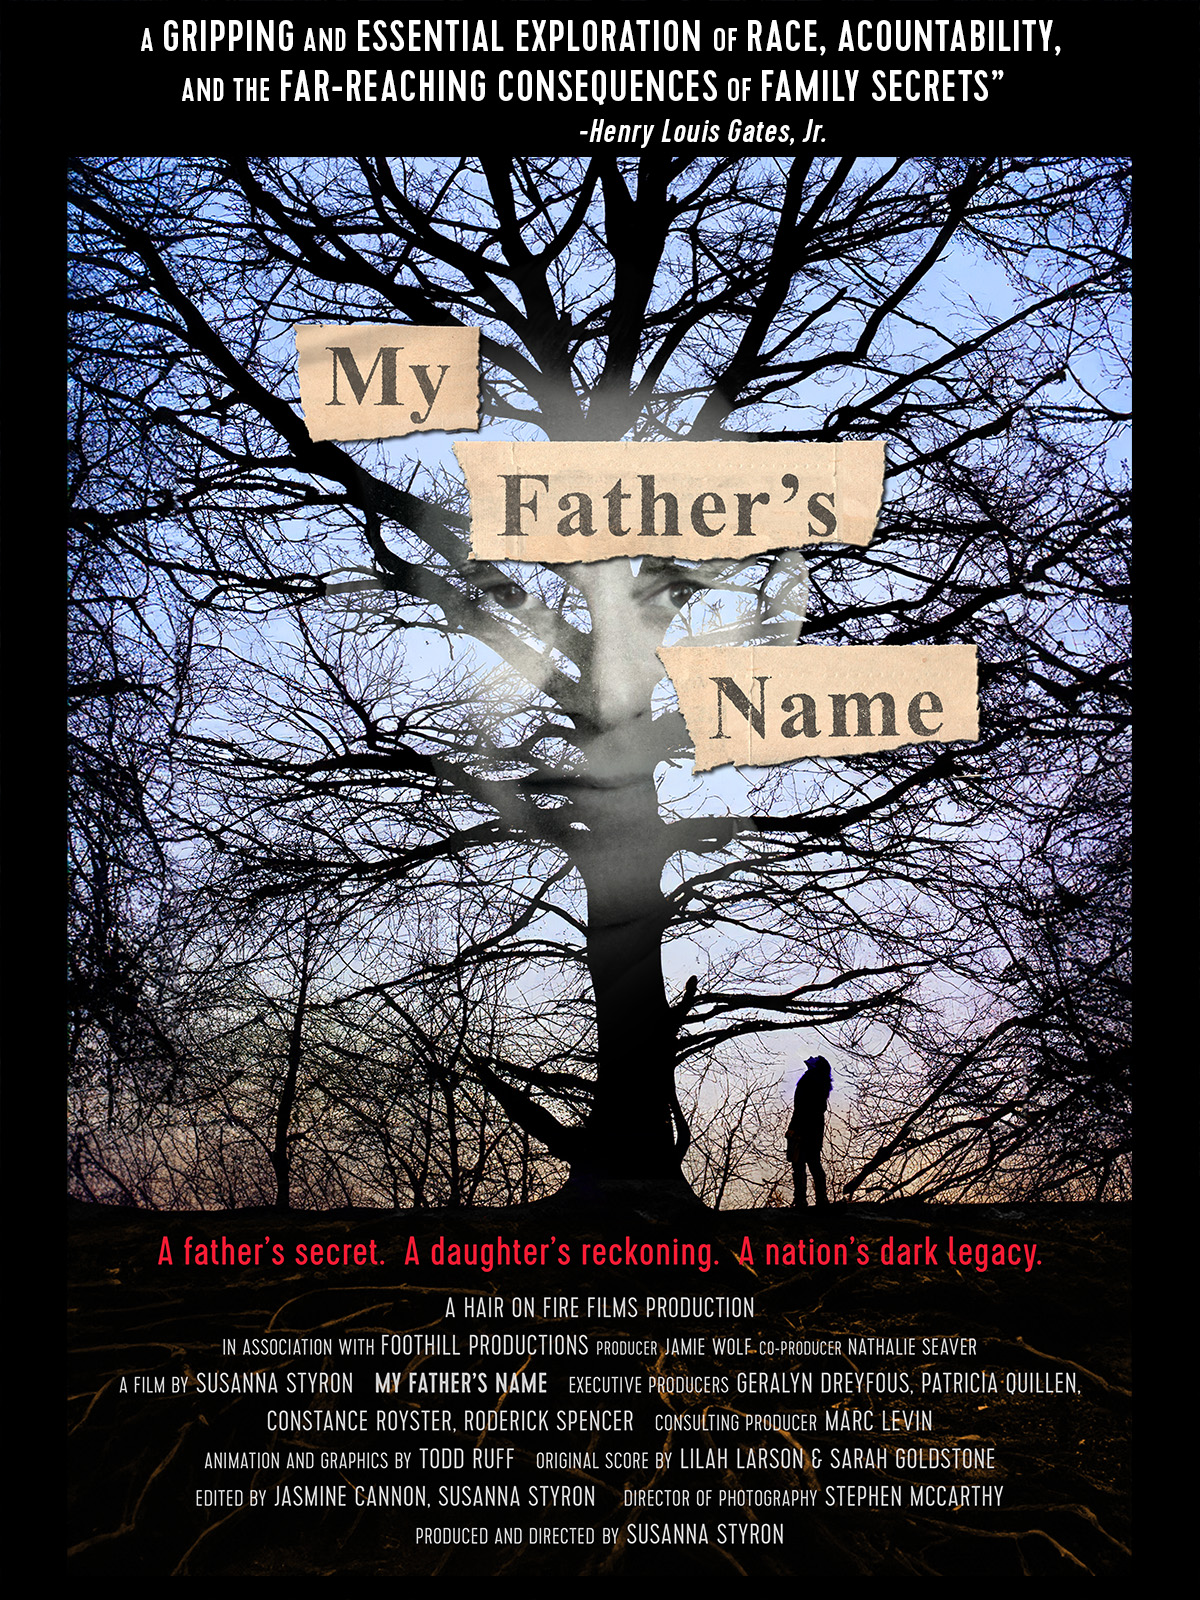 My Father's Name: A father's secret. A daughter's reckoning. A nation's dark legacy.